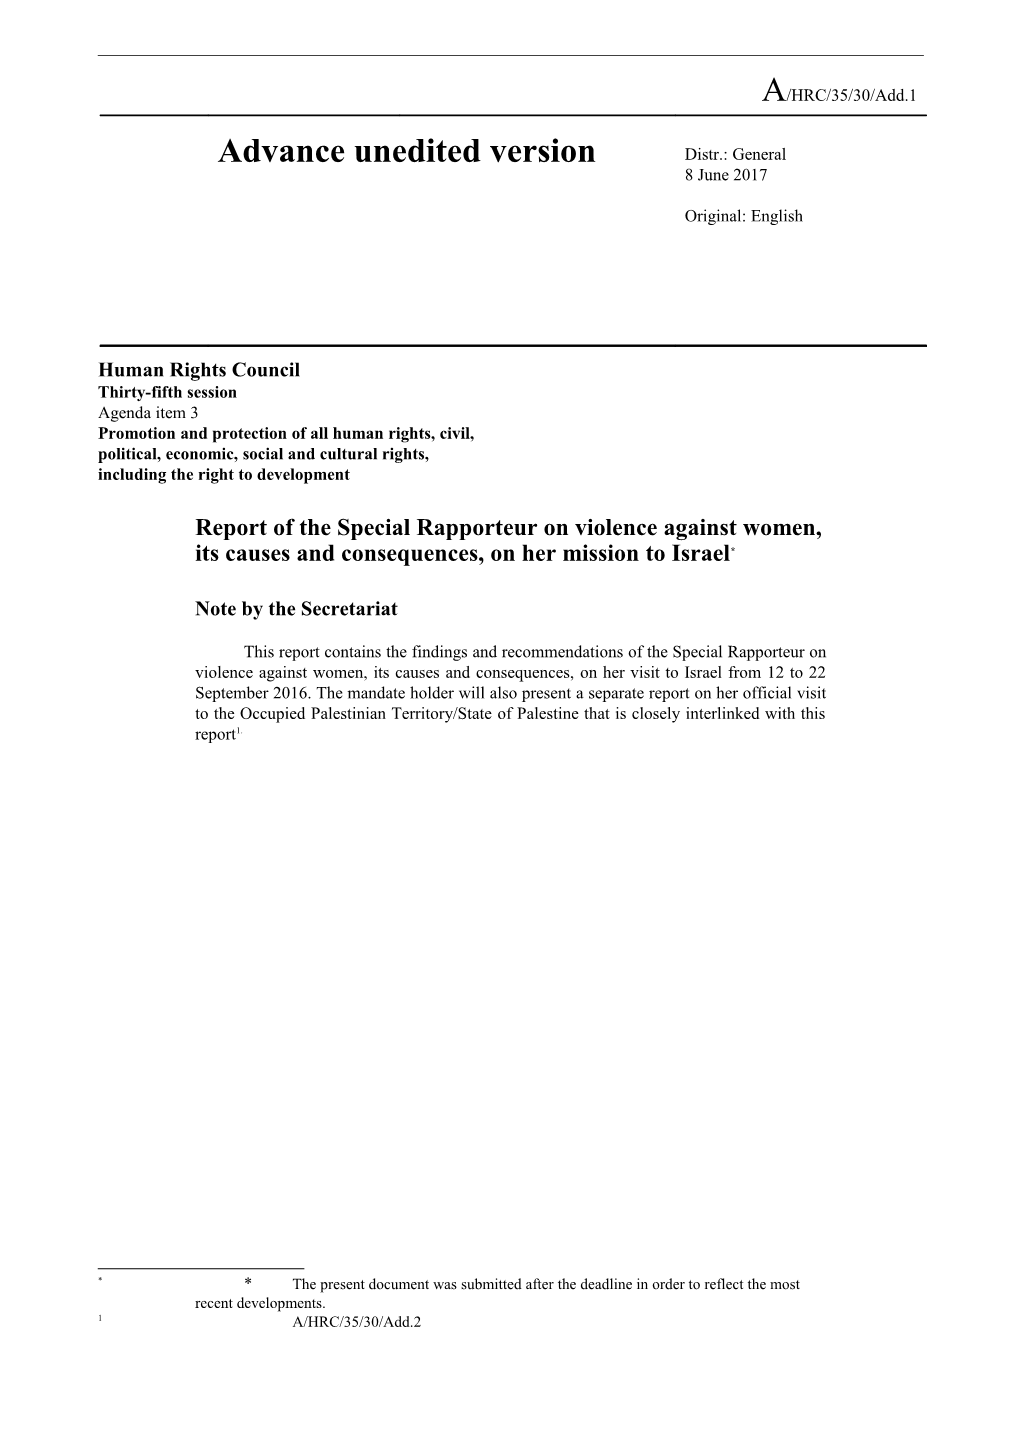 Report of the Special Rapporteur on Violence Against Women, Its Causes and Consequences